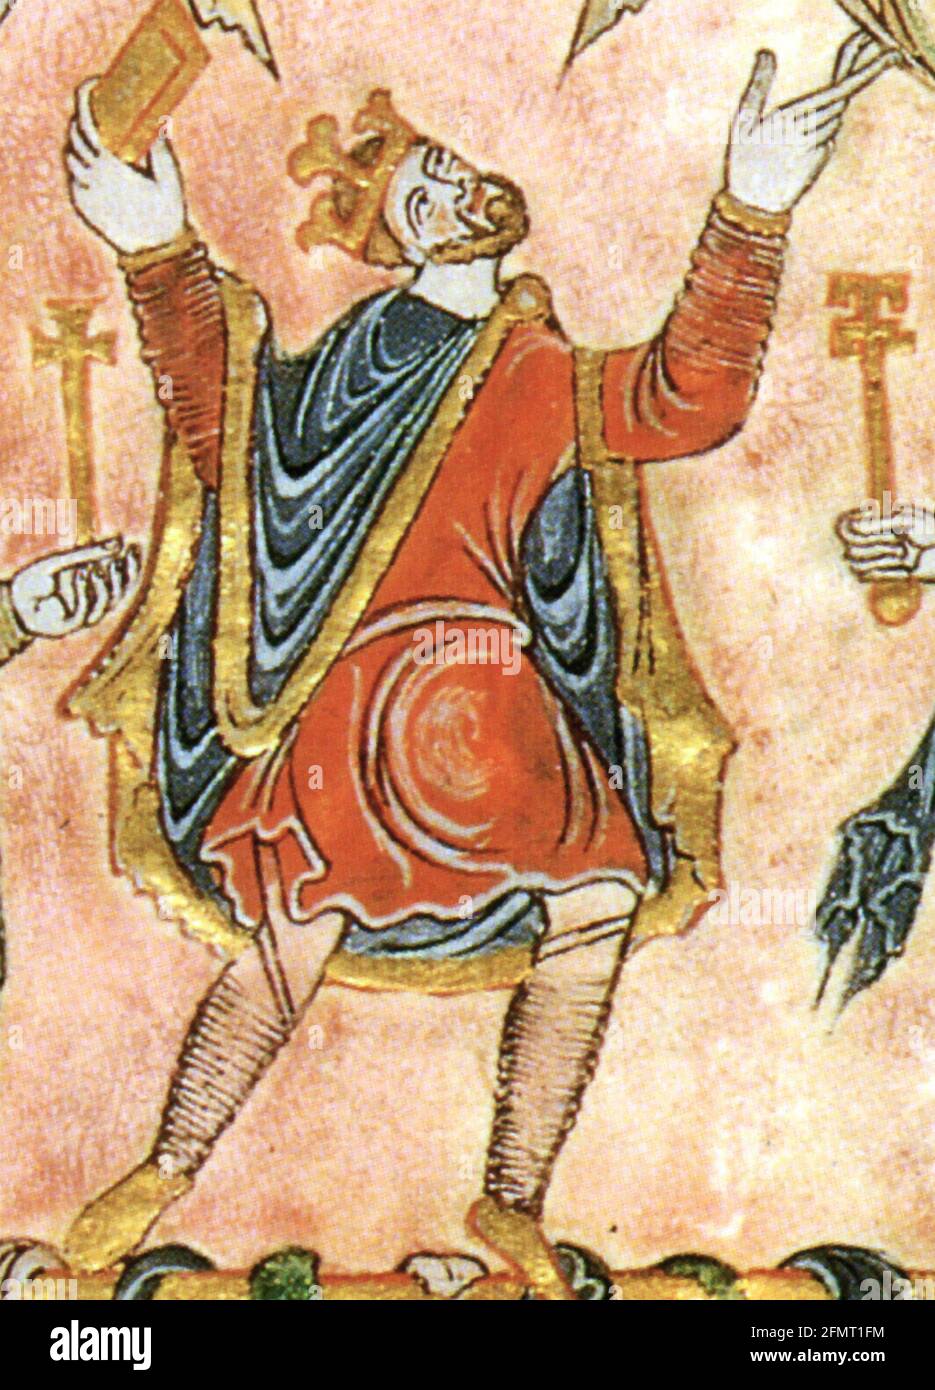 KING EDGAR THE PEACEFUL (c 943-975) English king as shown in the New Minster Charter in 966 Stock Photo